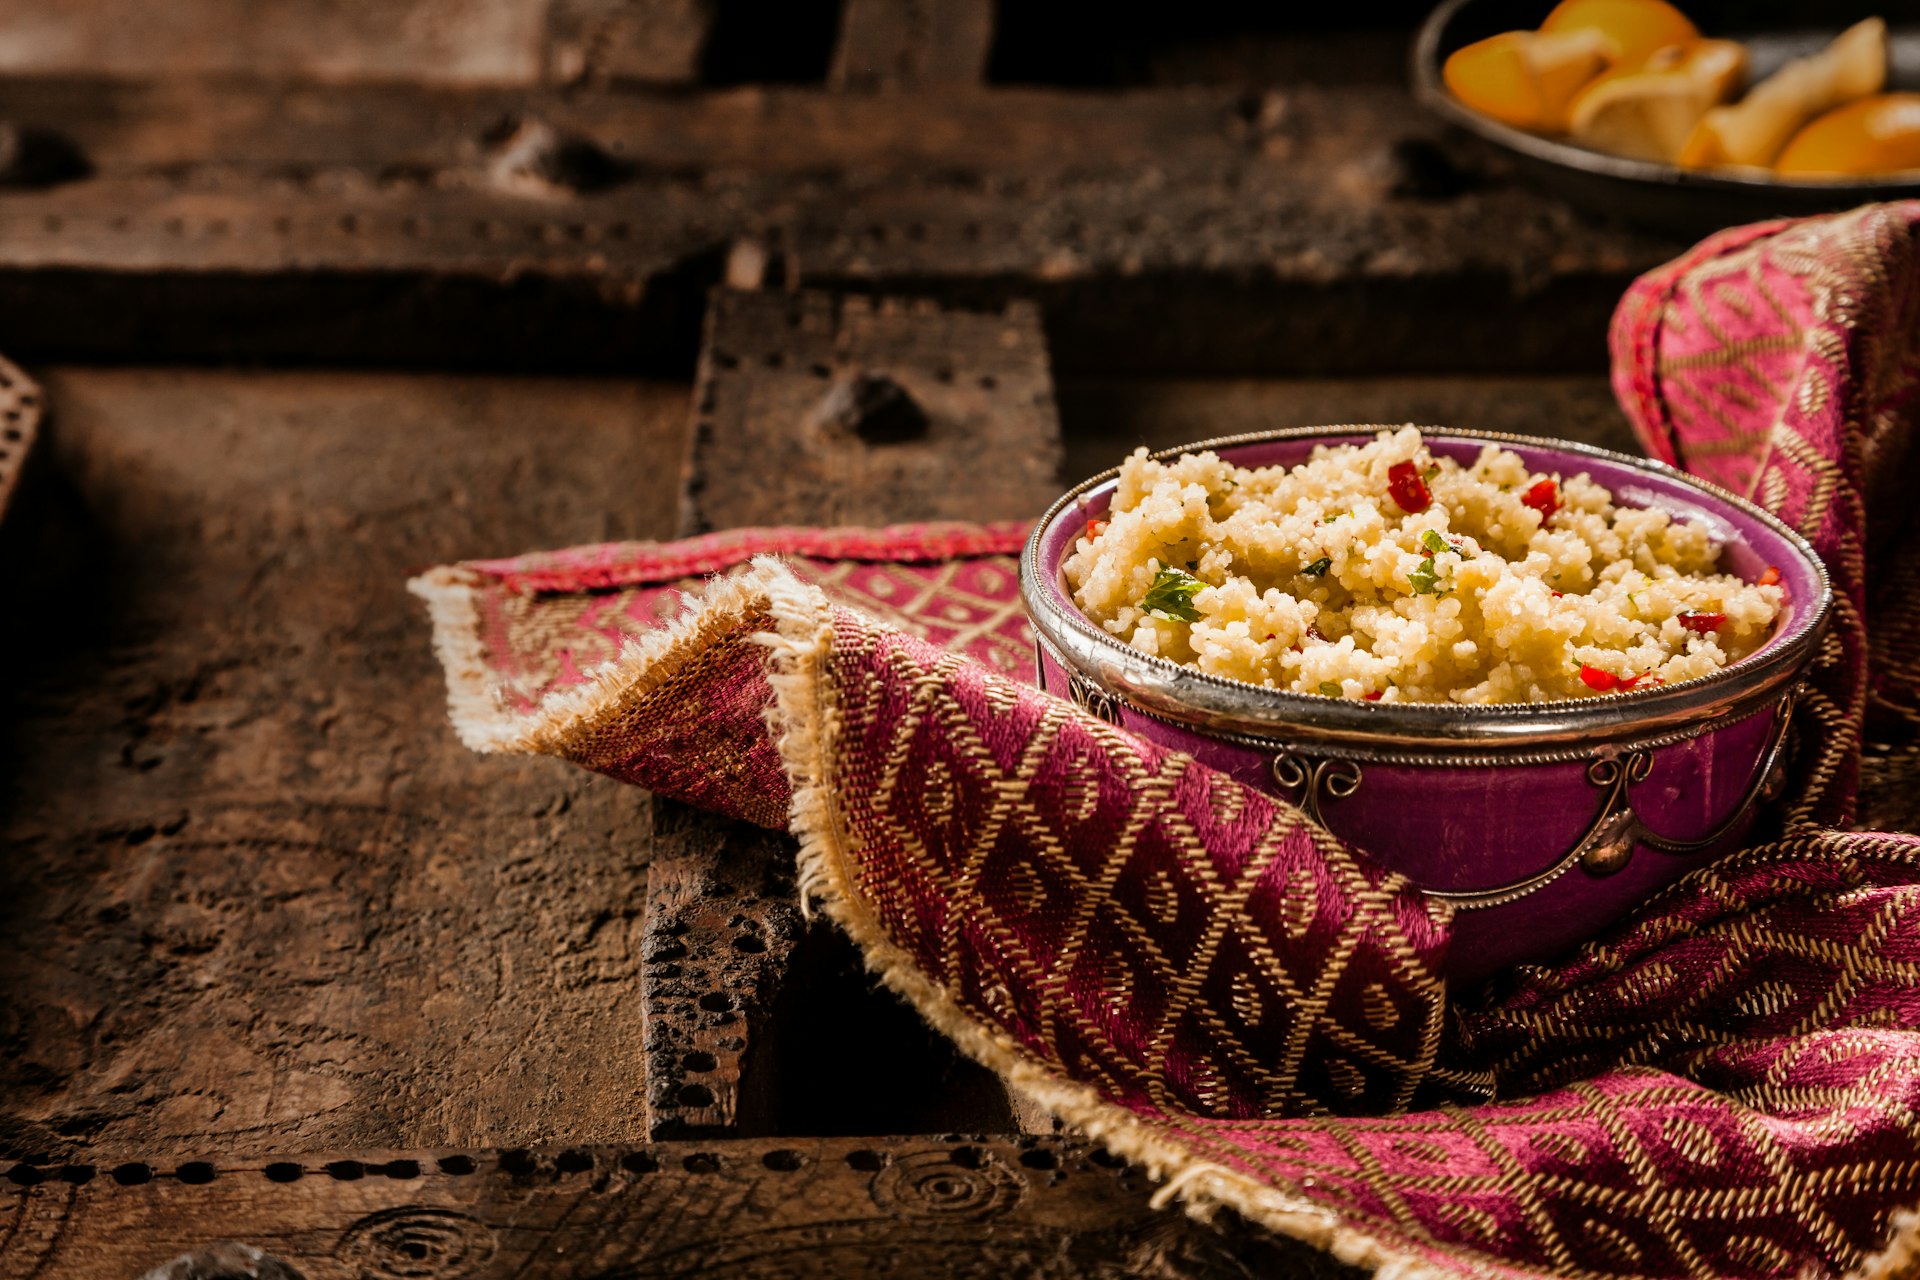 An ornate bowl of traditional Moroccan jeweled couscous.